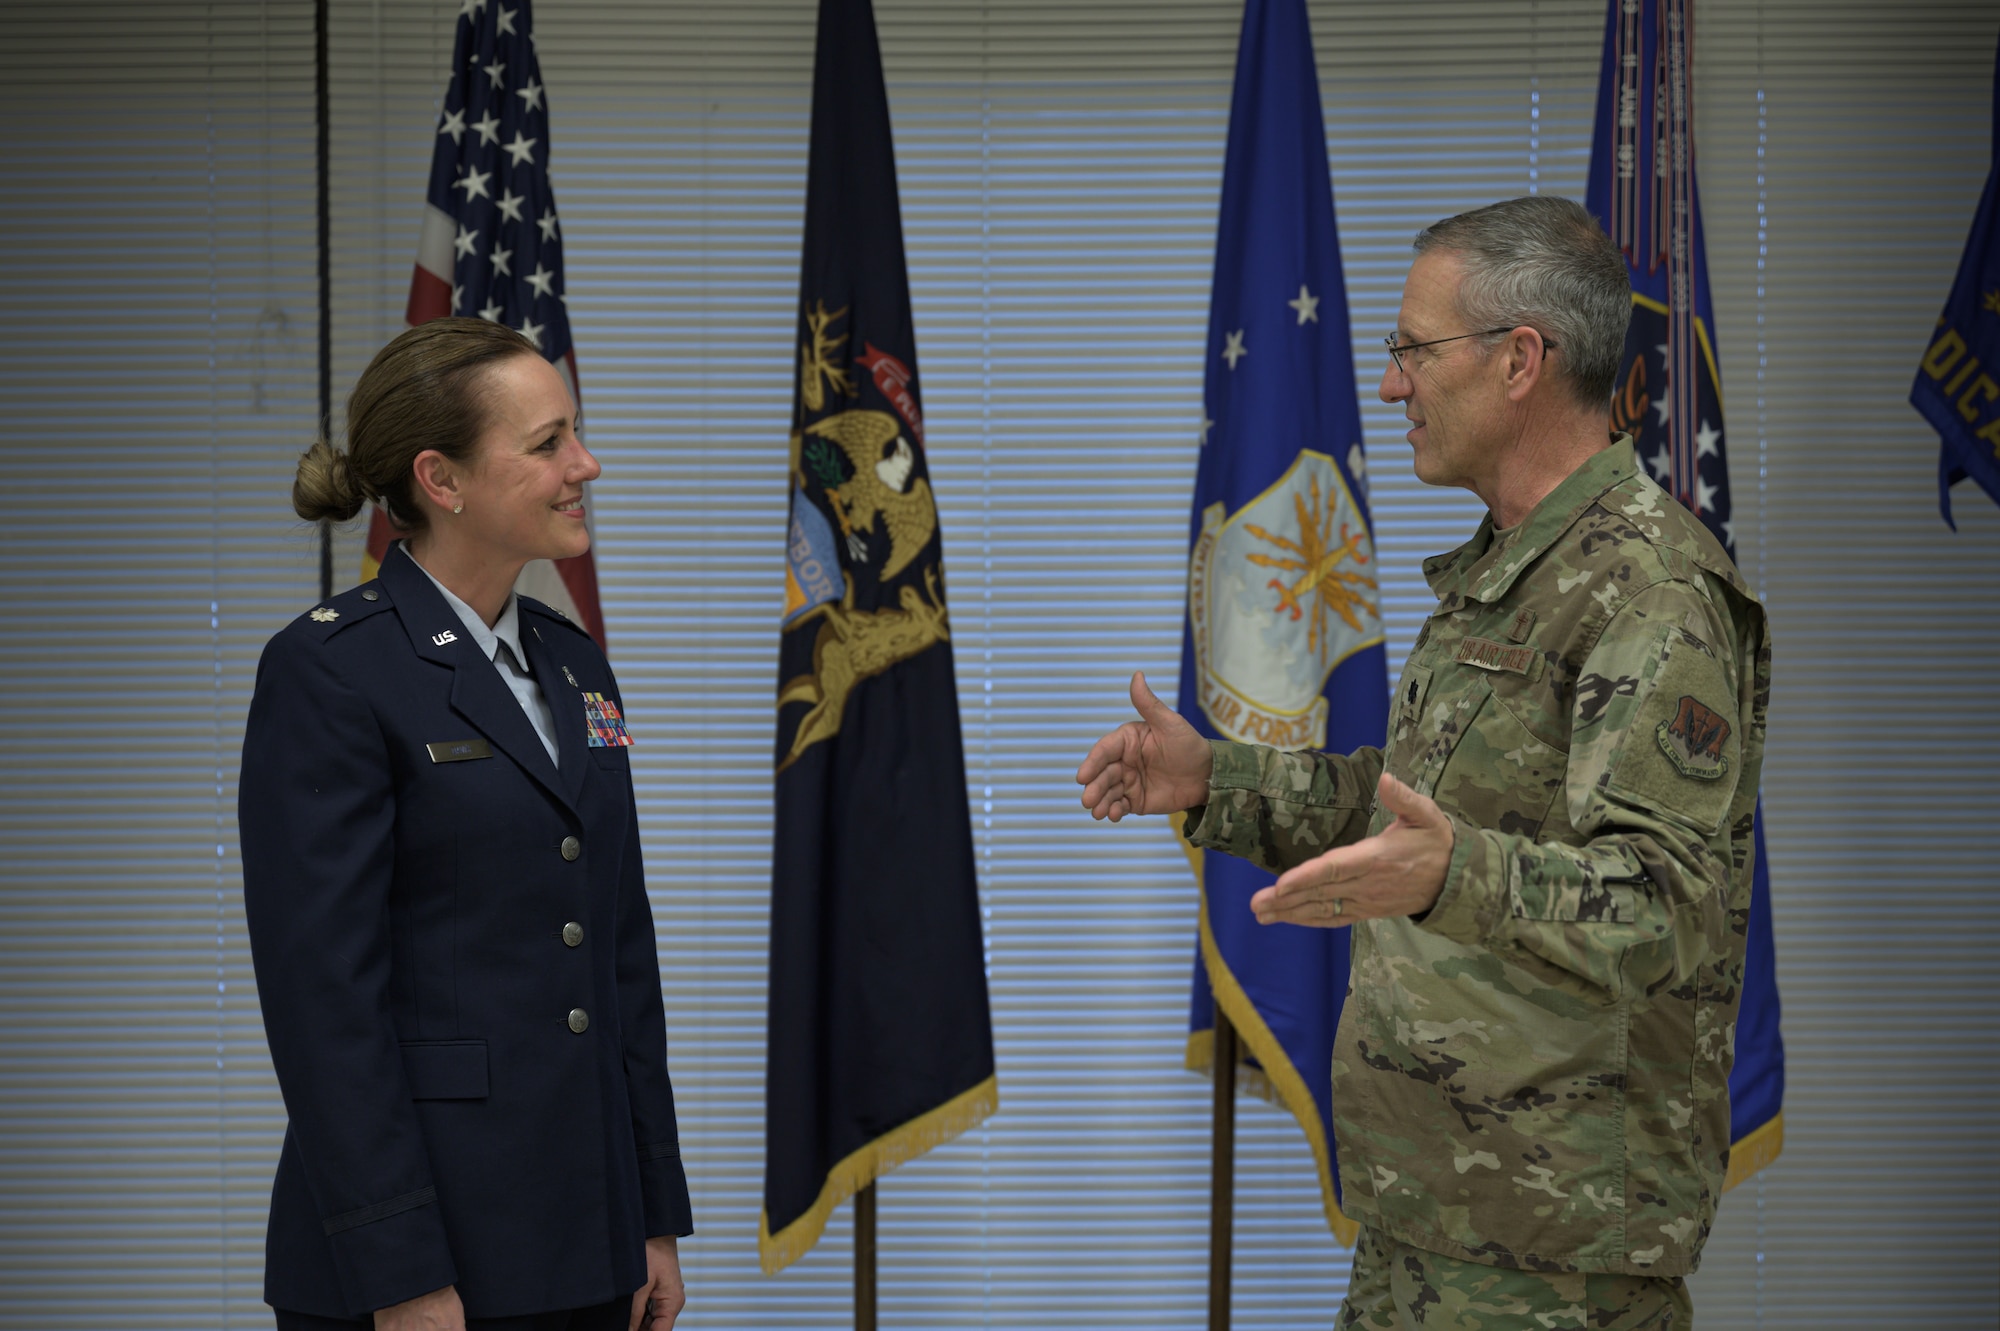 Lt. Col. Janice Davis assumes command of the 110th Medical Group